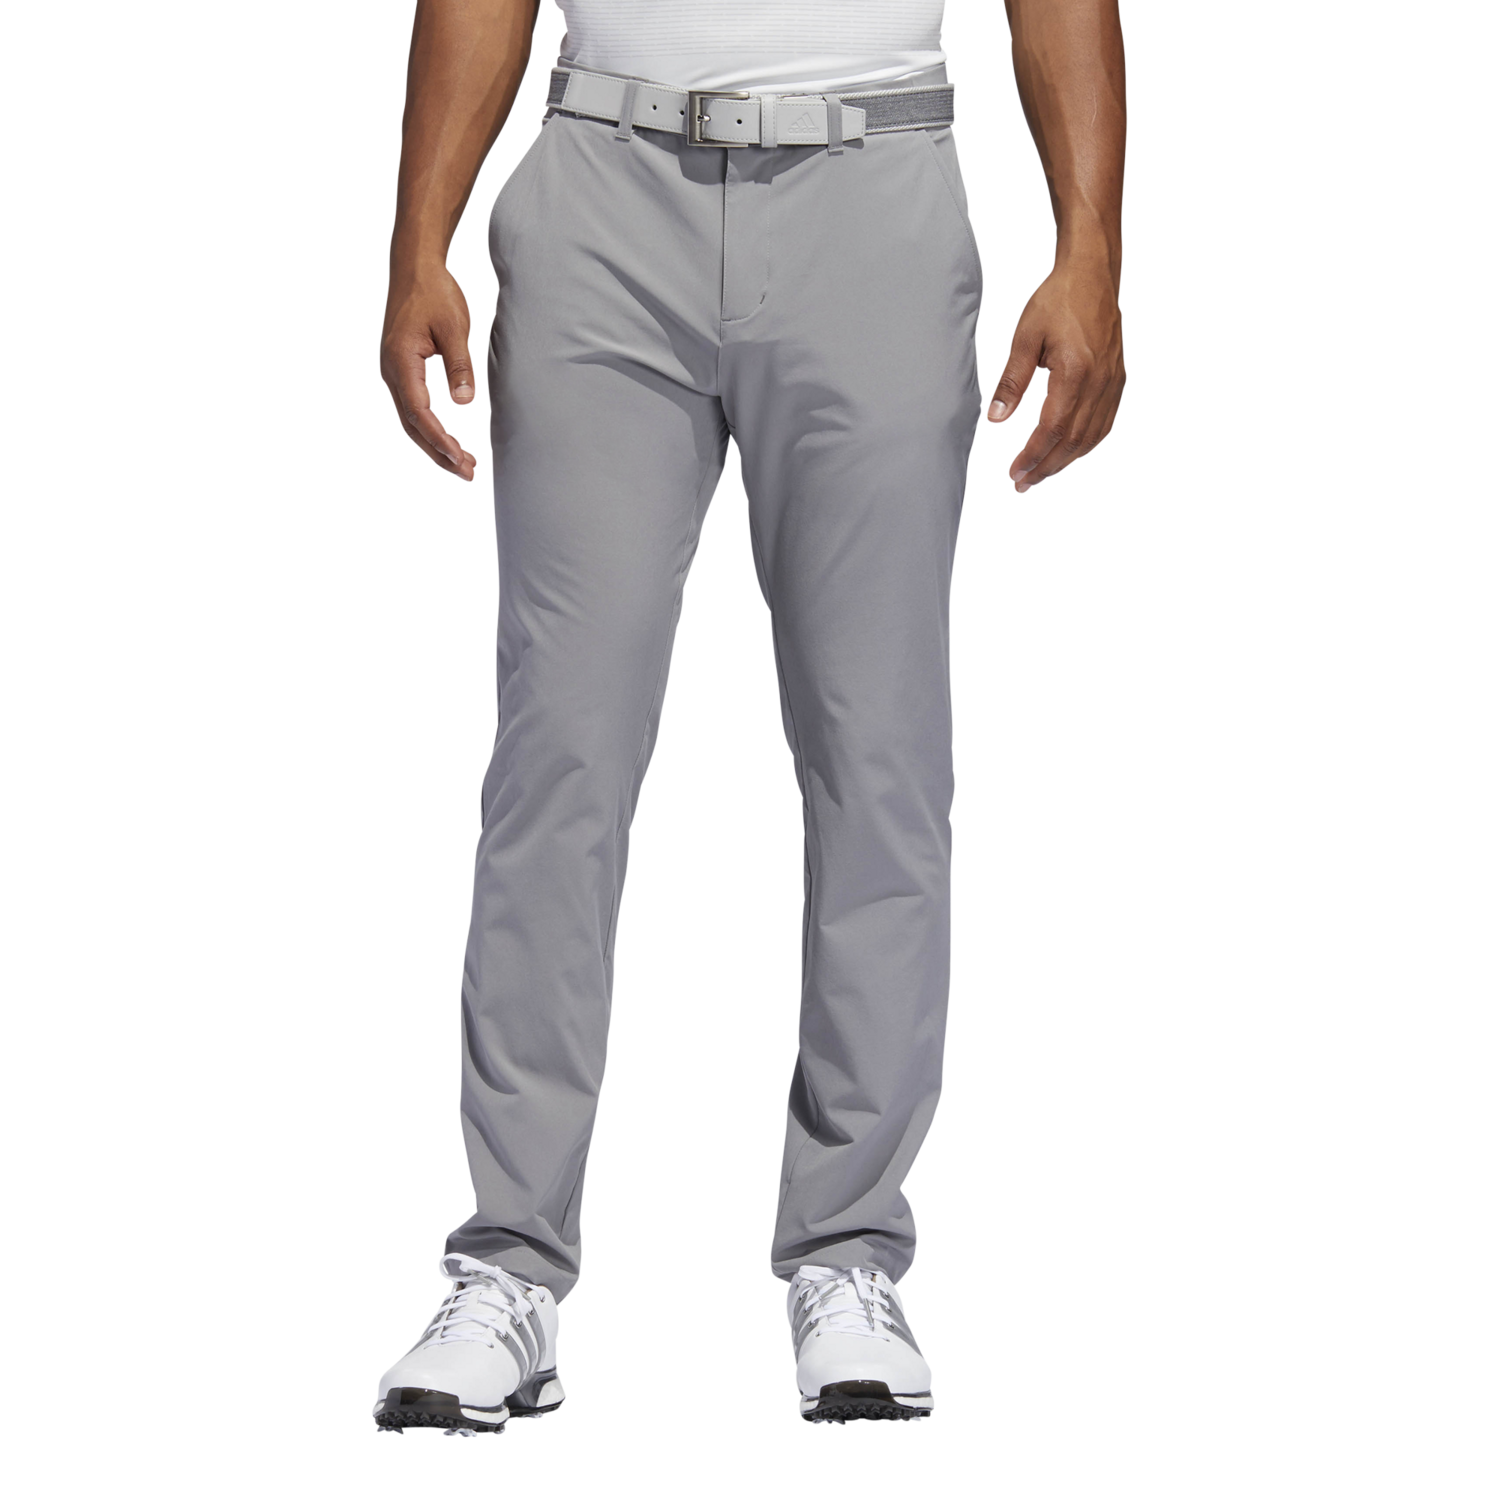 adidas ultimate 365 tapered pants